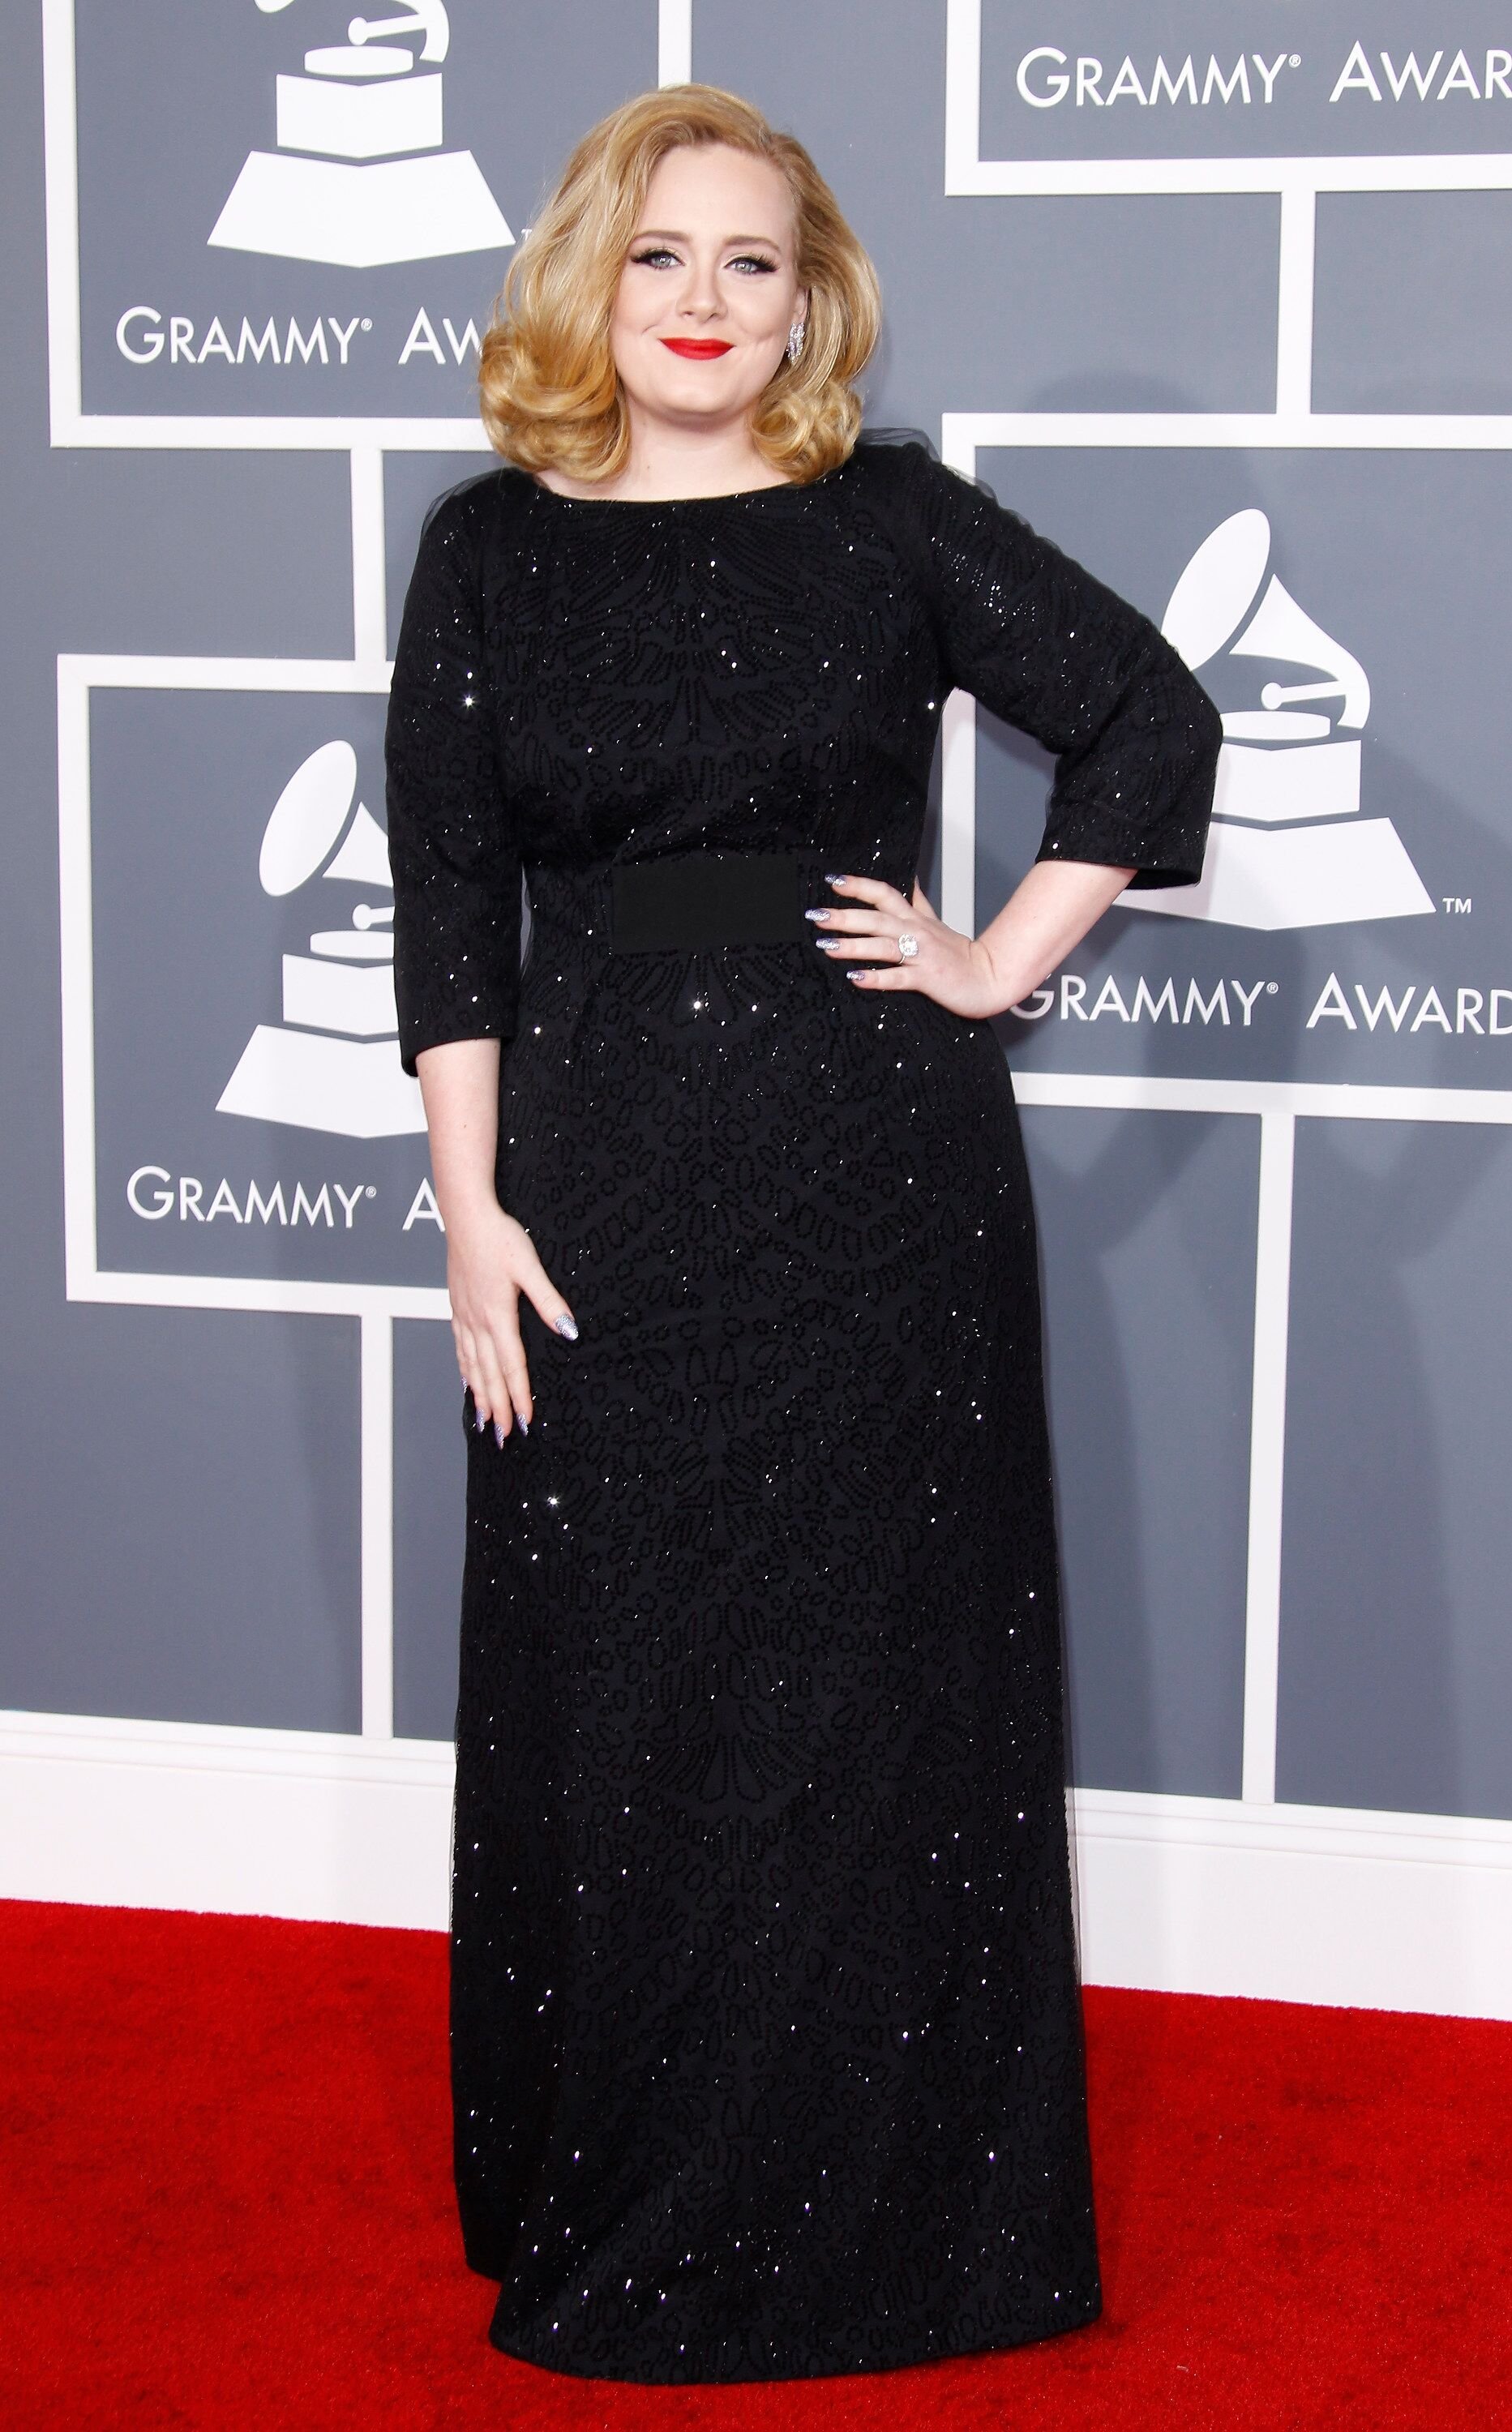 LOS ANGELES, CA - FEBRUARY 12: Singer Adele arrives at the 54th Annual GRAMMY Awards held at the Staples Center on February 12, 2012 in Los Angeles, California. (Photo by Dan MacMedan/WireImage)